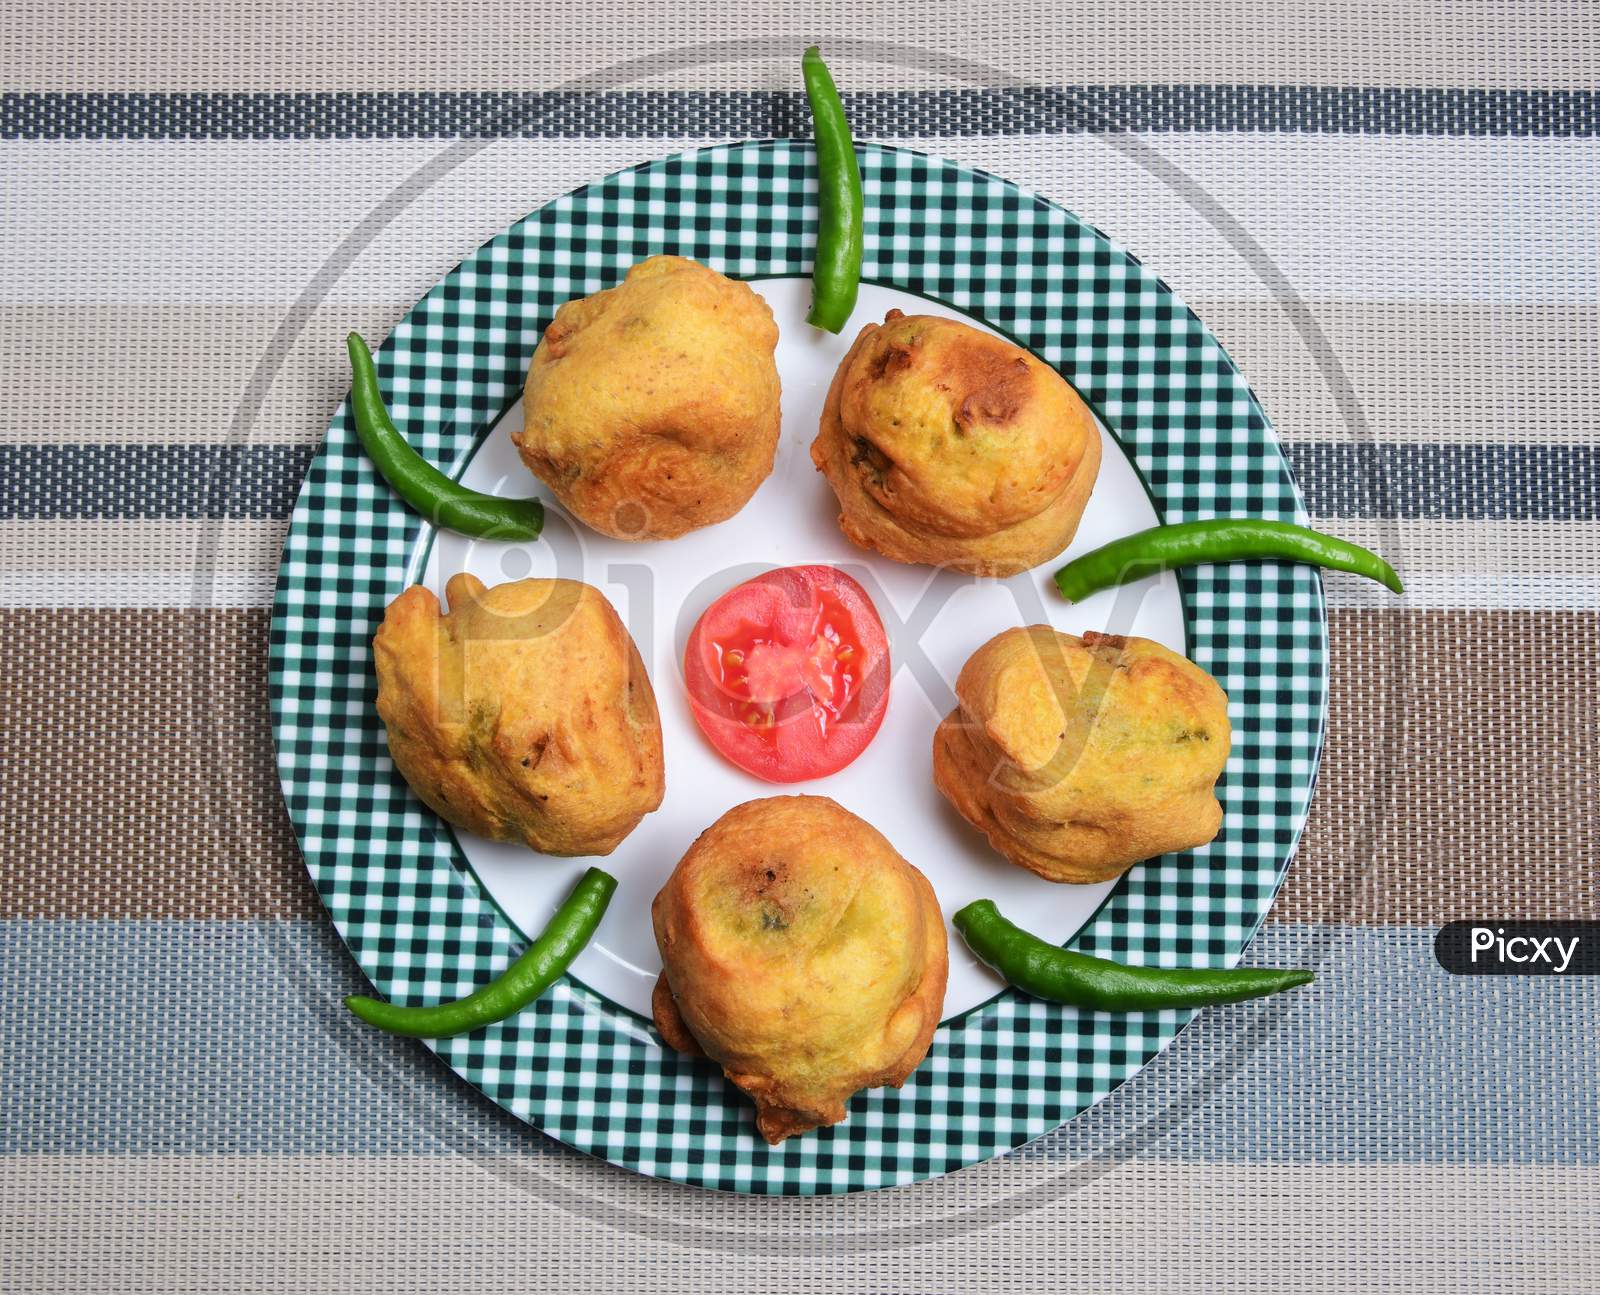 Mashed potato balls coated with chickpea flour and lightly fried. Vada Pav.